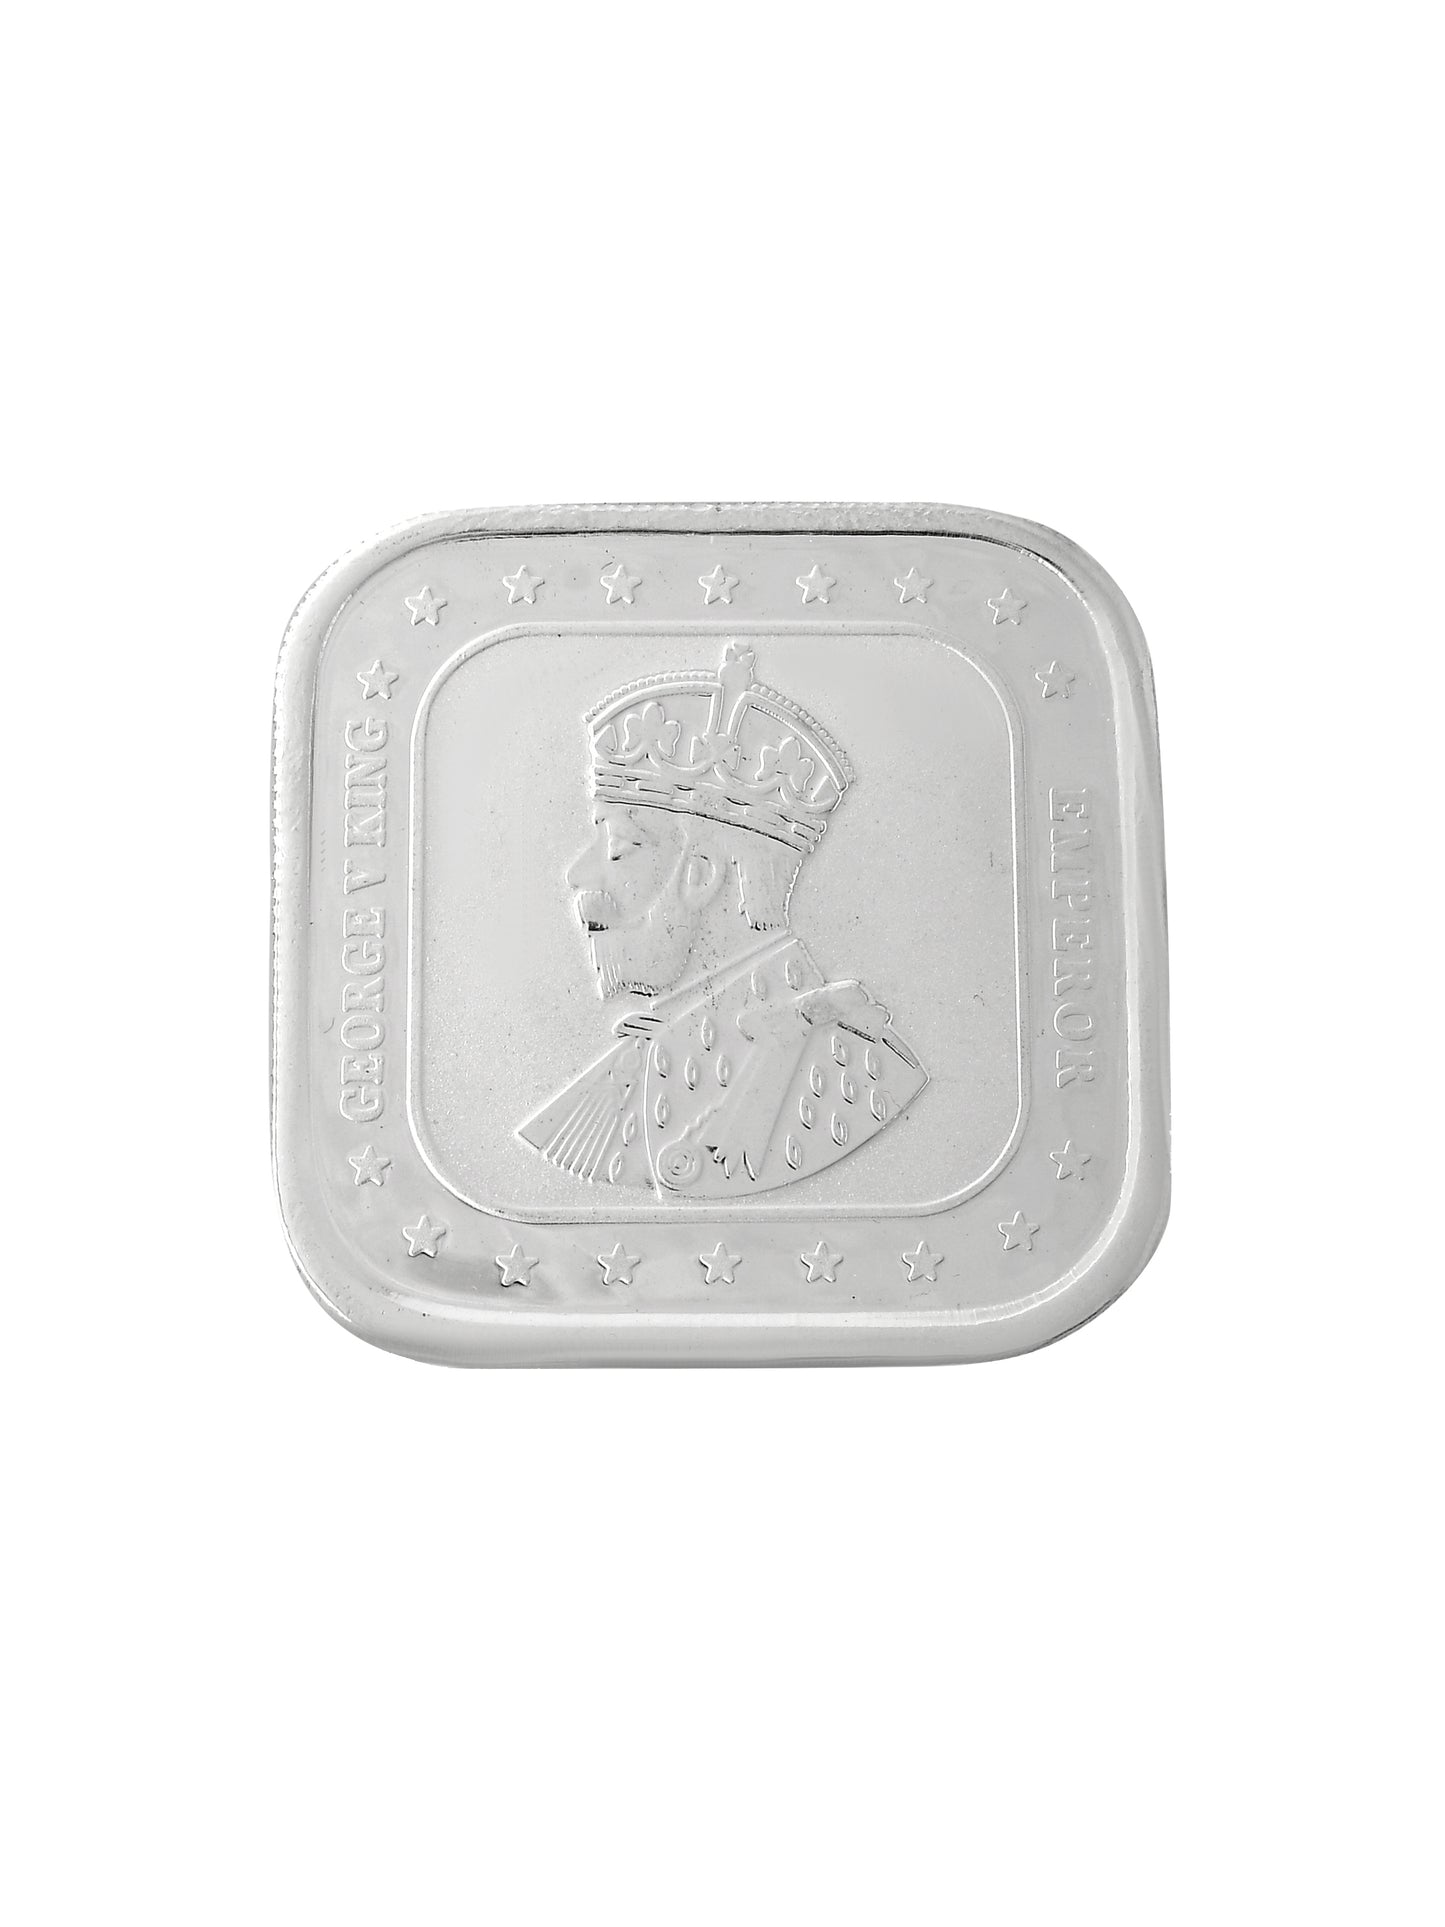 Silver 20 grams square Shaped 999 Silver Coin